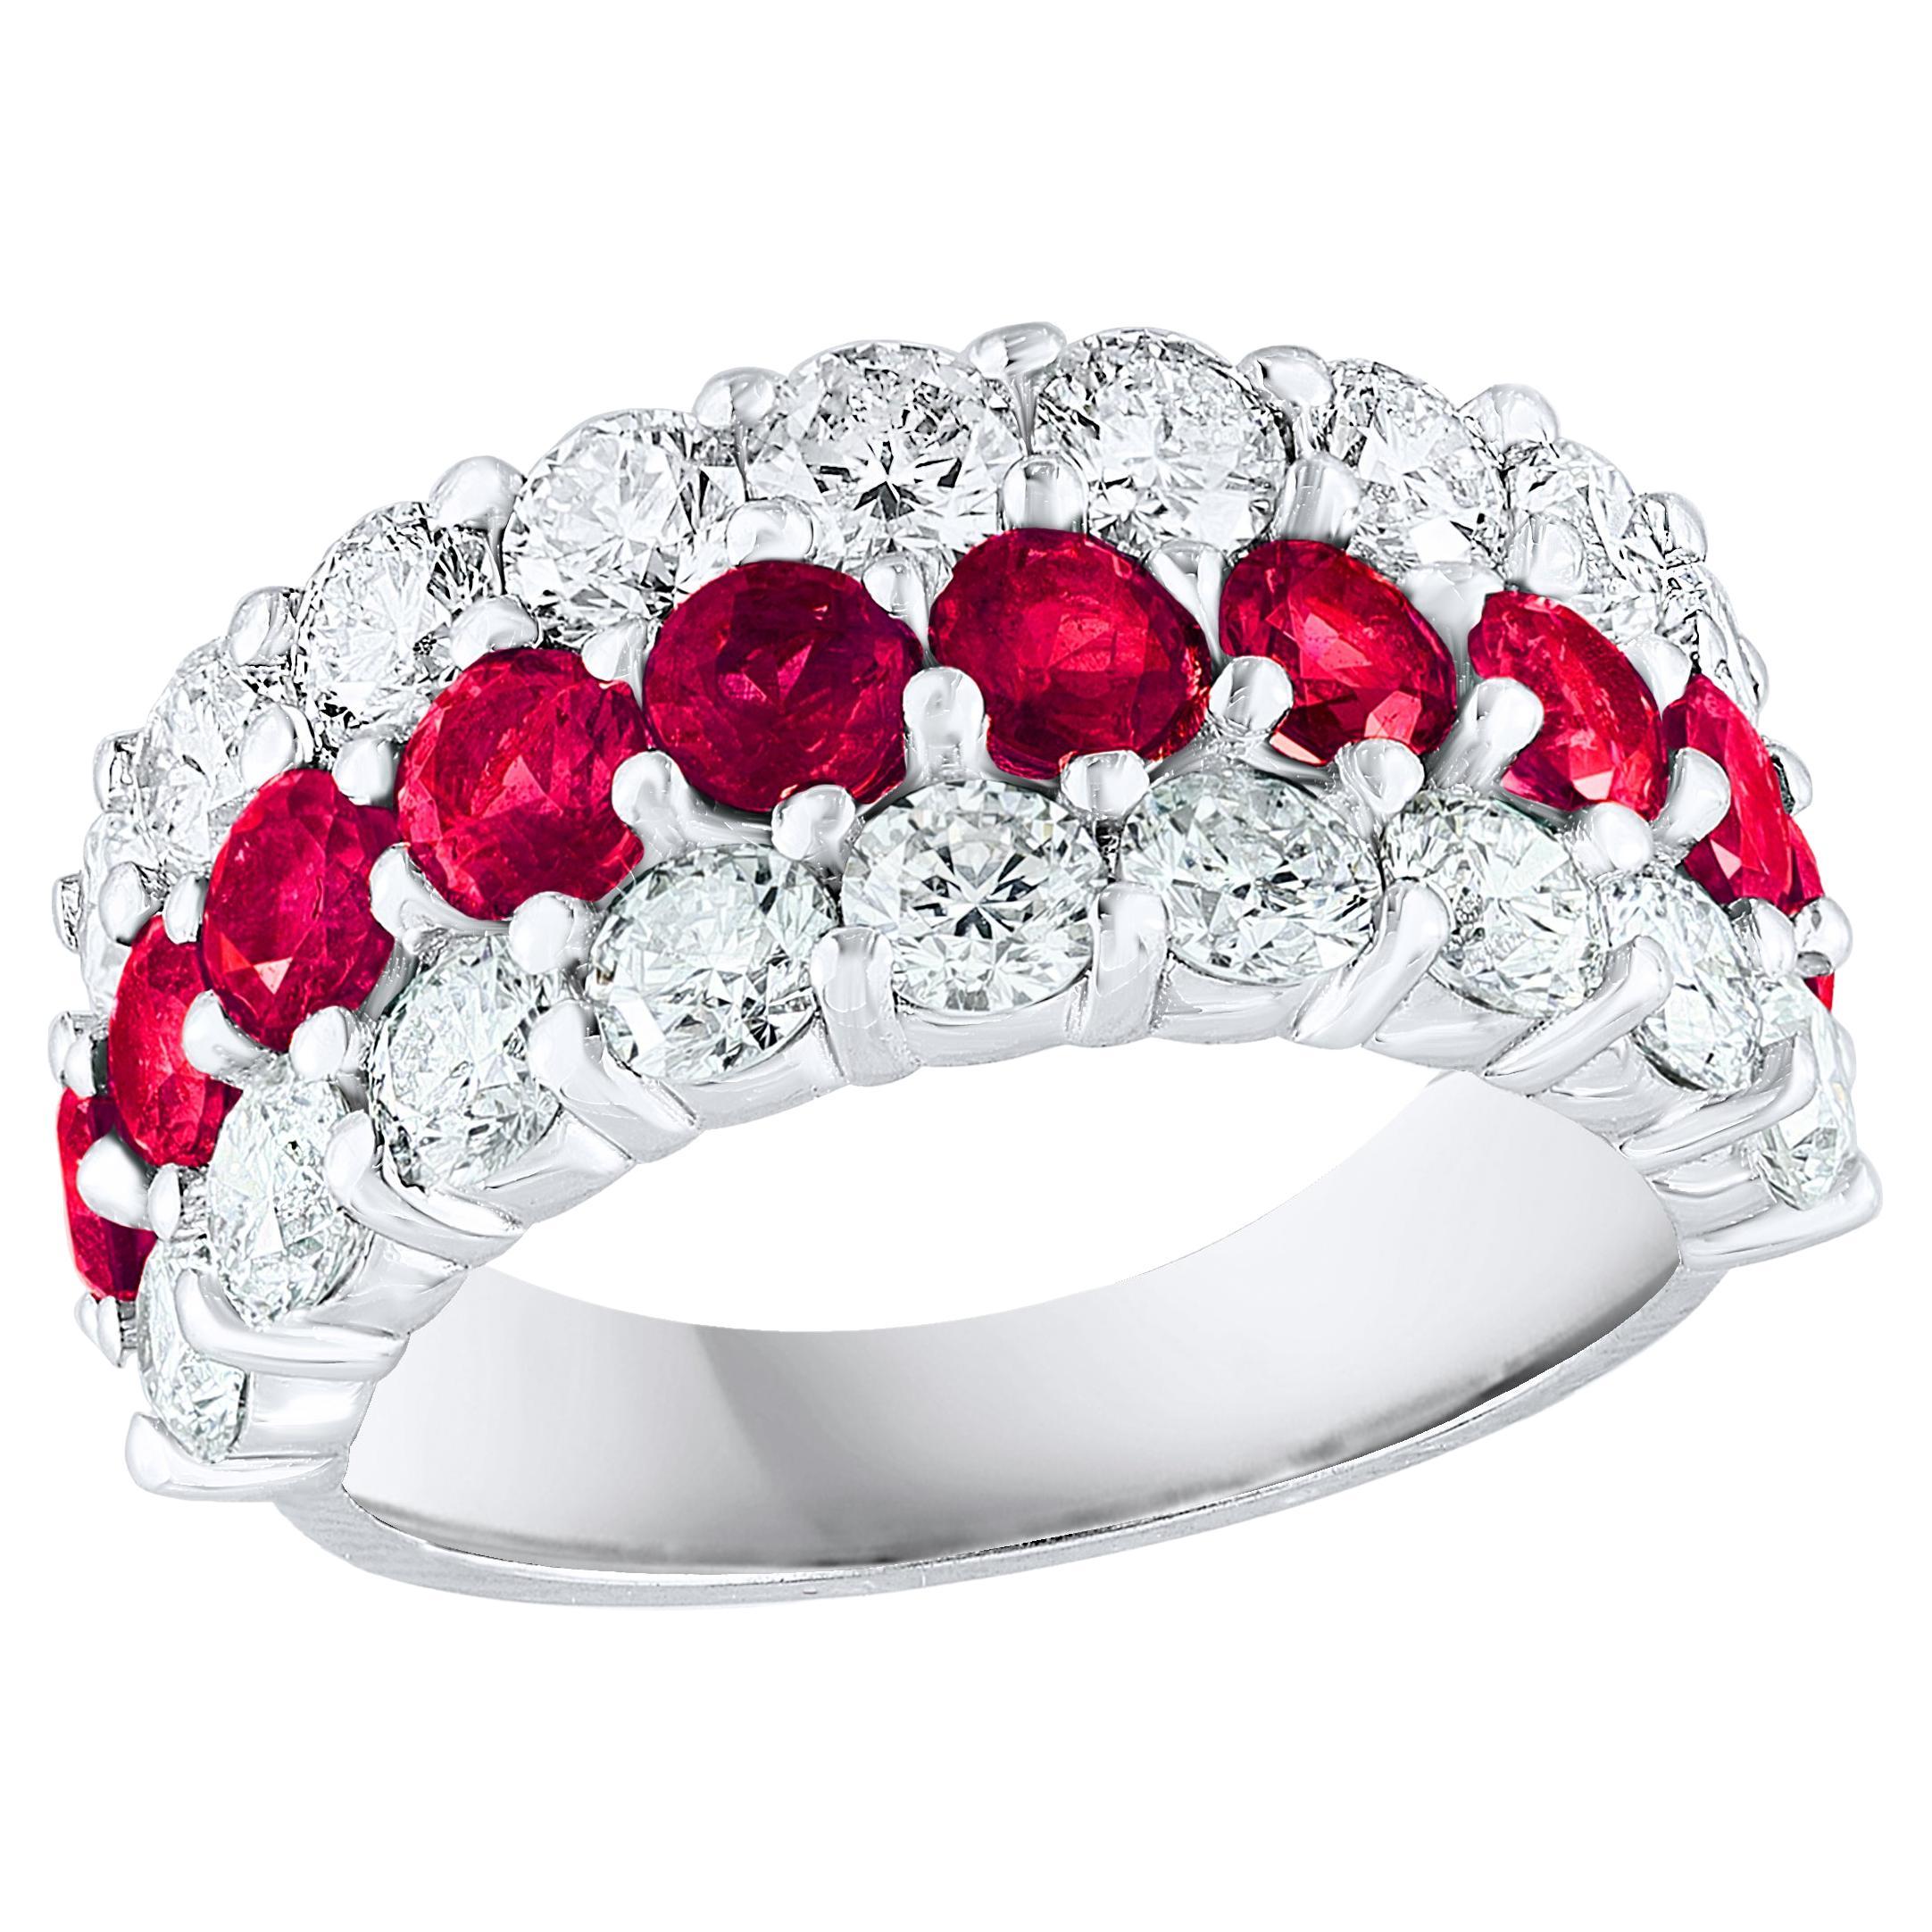 1.80 Ct Round Shape Ruby and Diamond Three Row Band Ring in 14K White Gold